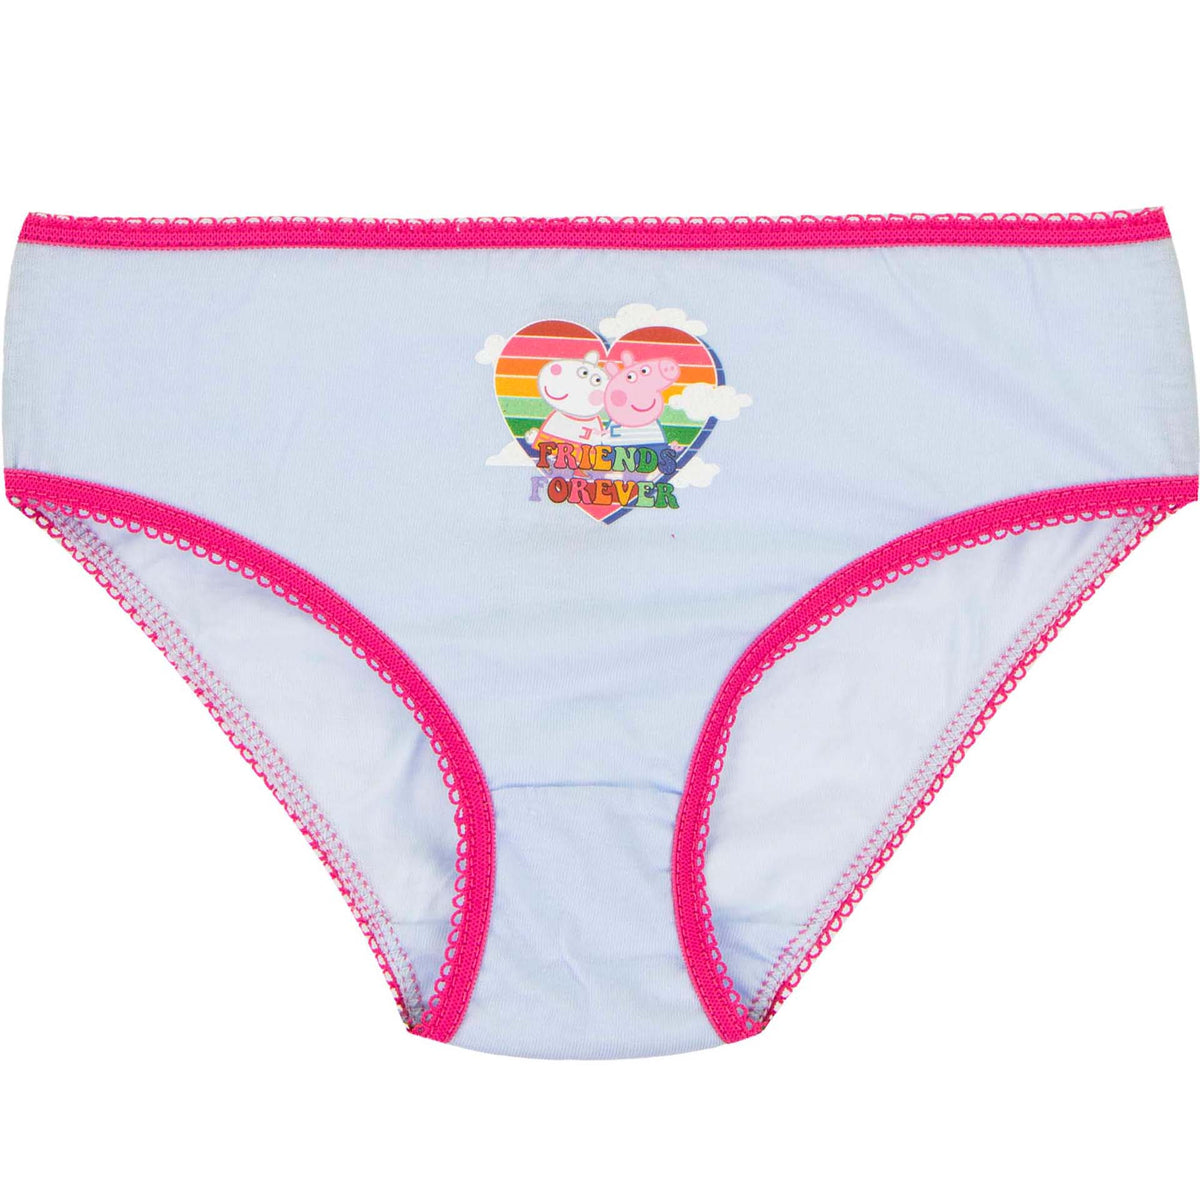 Find more Peppa Pig 3t Undies for sale at up to 90% off